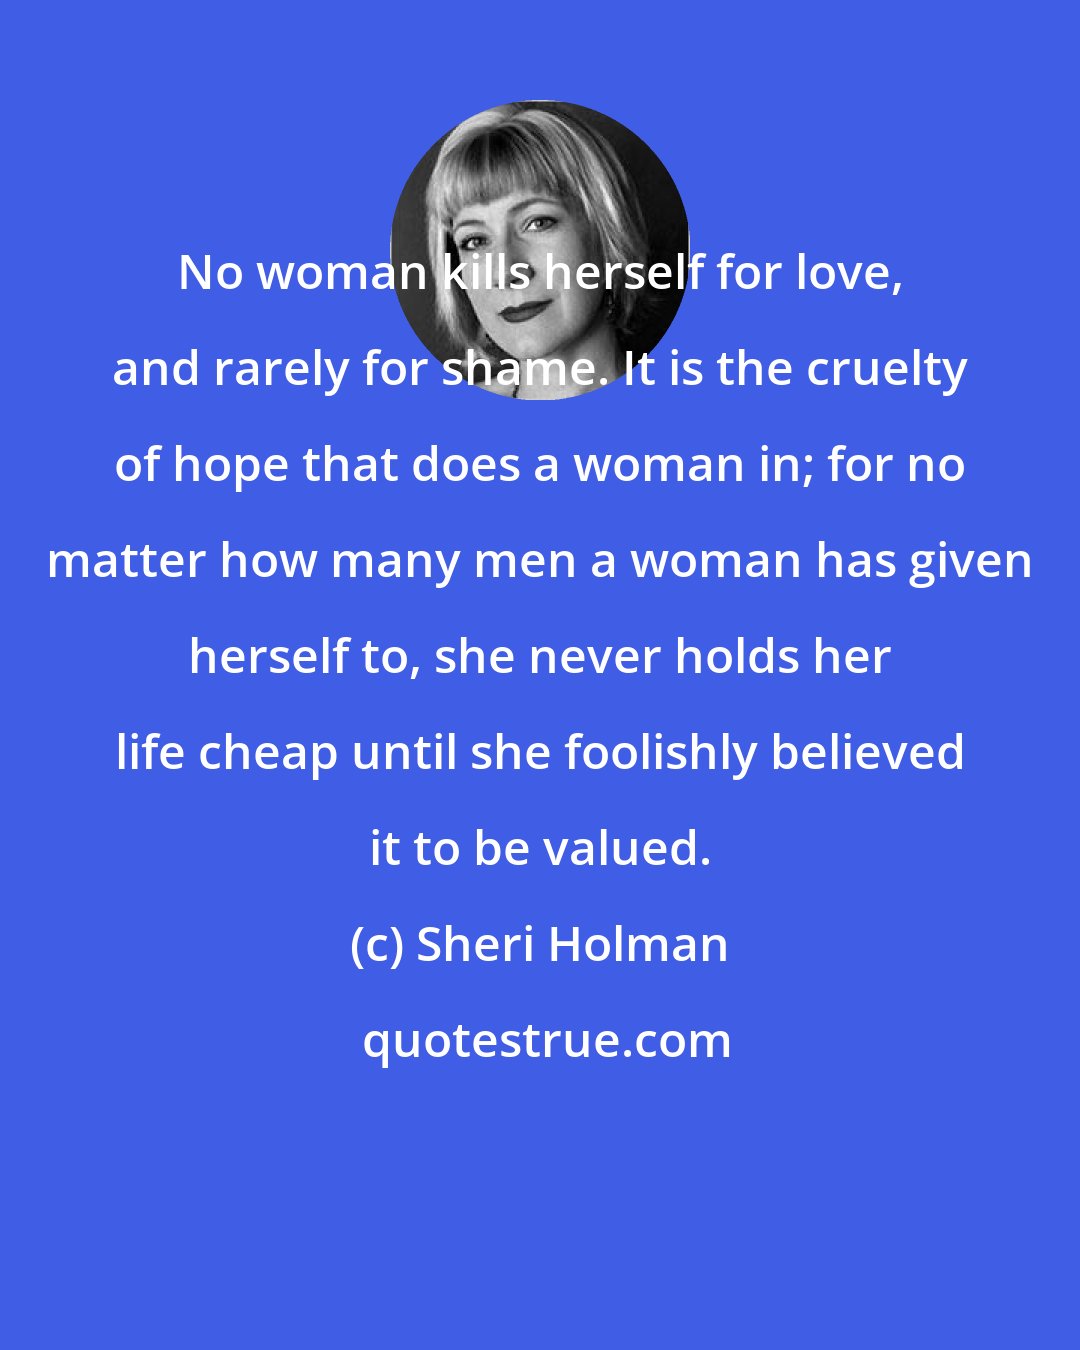 Sheri Holman: No woman kills herself for love, and rarely for shame. It is the cruelty of hope that does a woman in; for no matter how many men a woman has given herself to, she never holds her life cheap until she foolishly believed it to be valued.